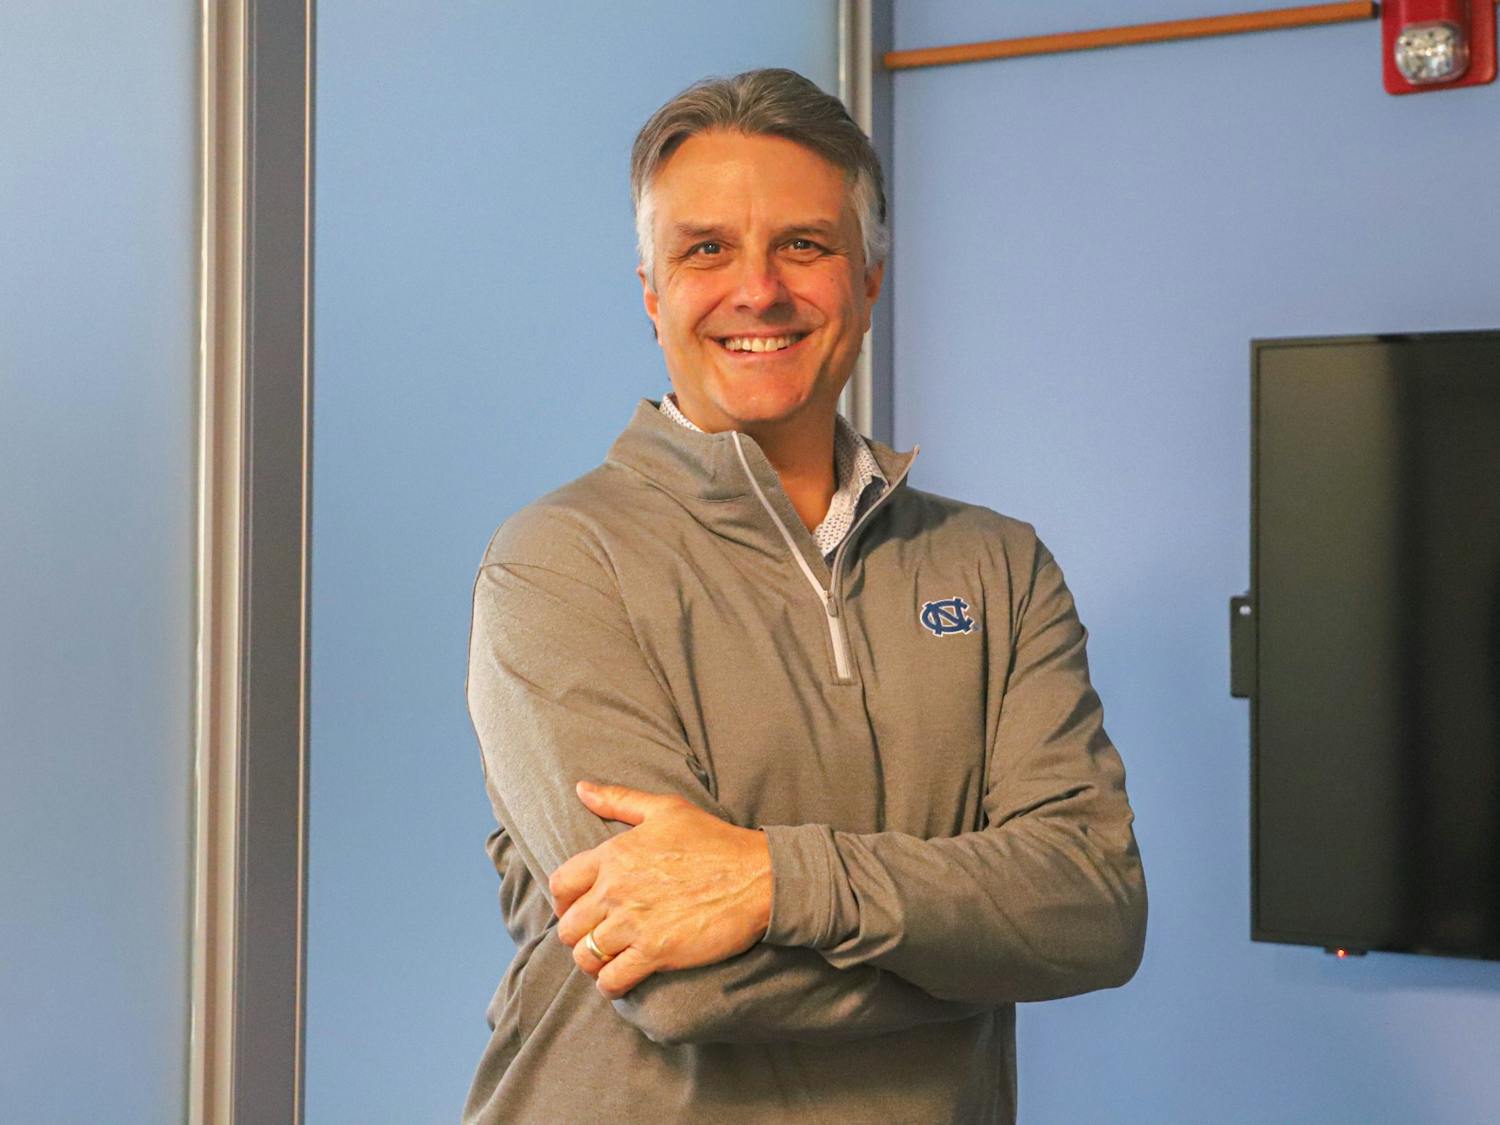 Bob Dieterle, the Managing Director for First in Venture Studio in Digital Health at the Eshelman Institute, is pictured on Feb. 20, 2023, in the Eshelman Institute Suite in Beard Hall.